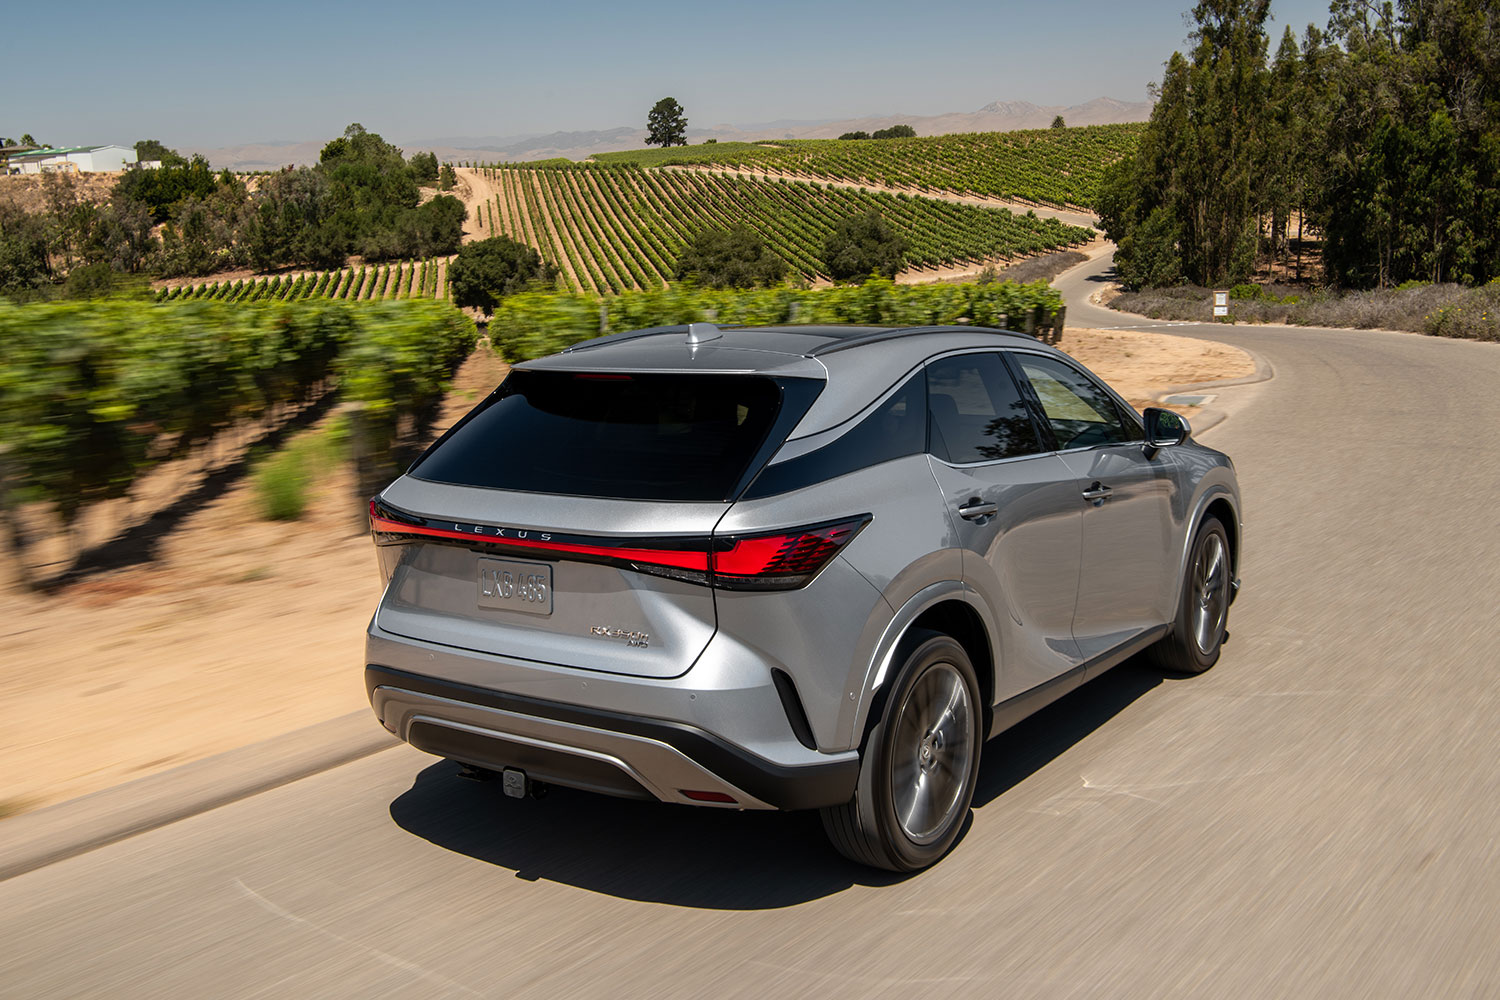 The rear end of the 2023 Lexus RX as it drives away